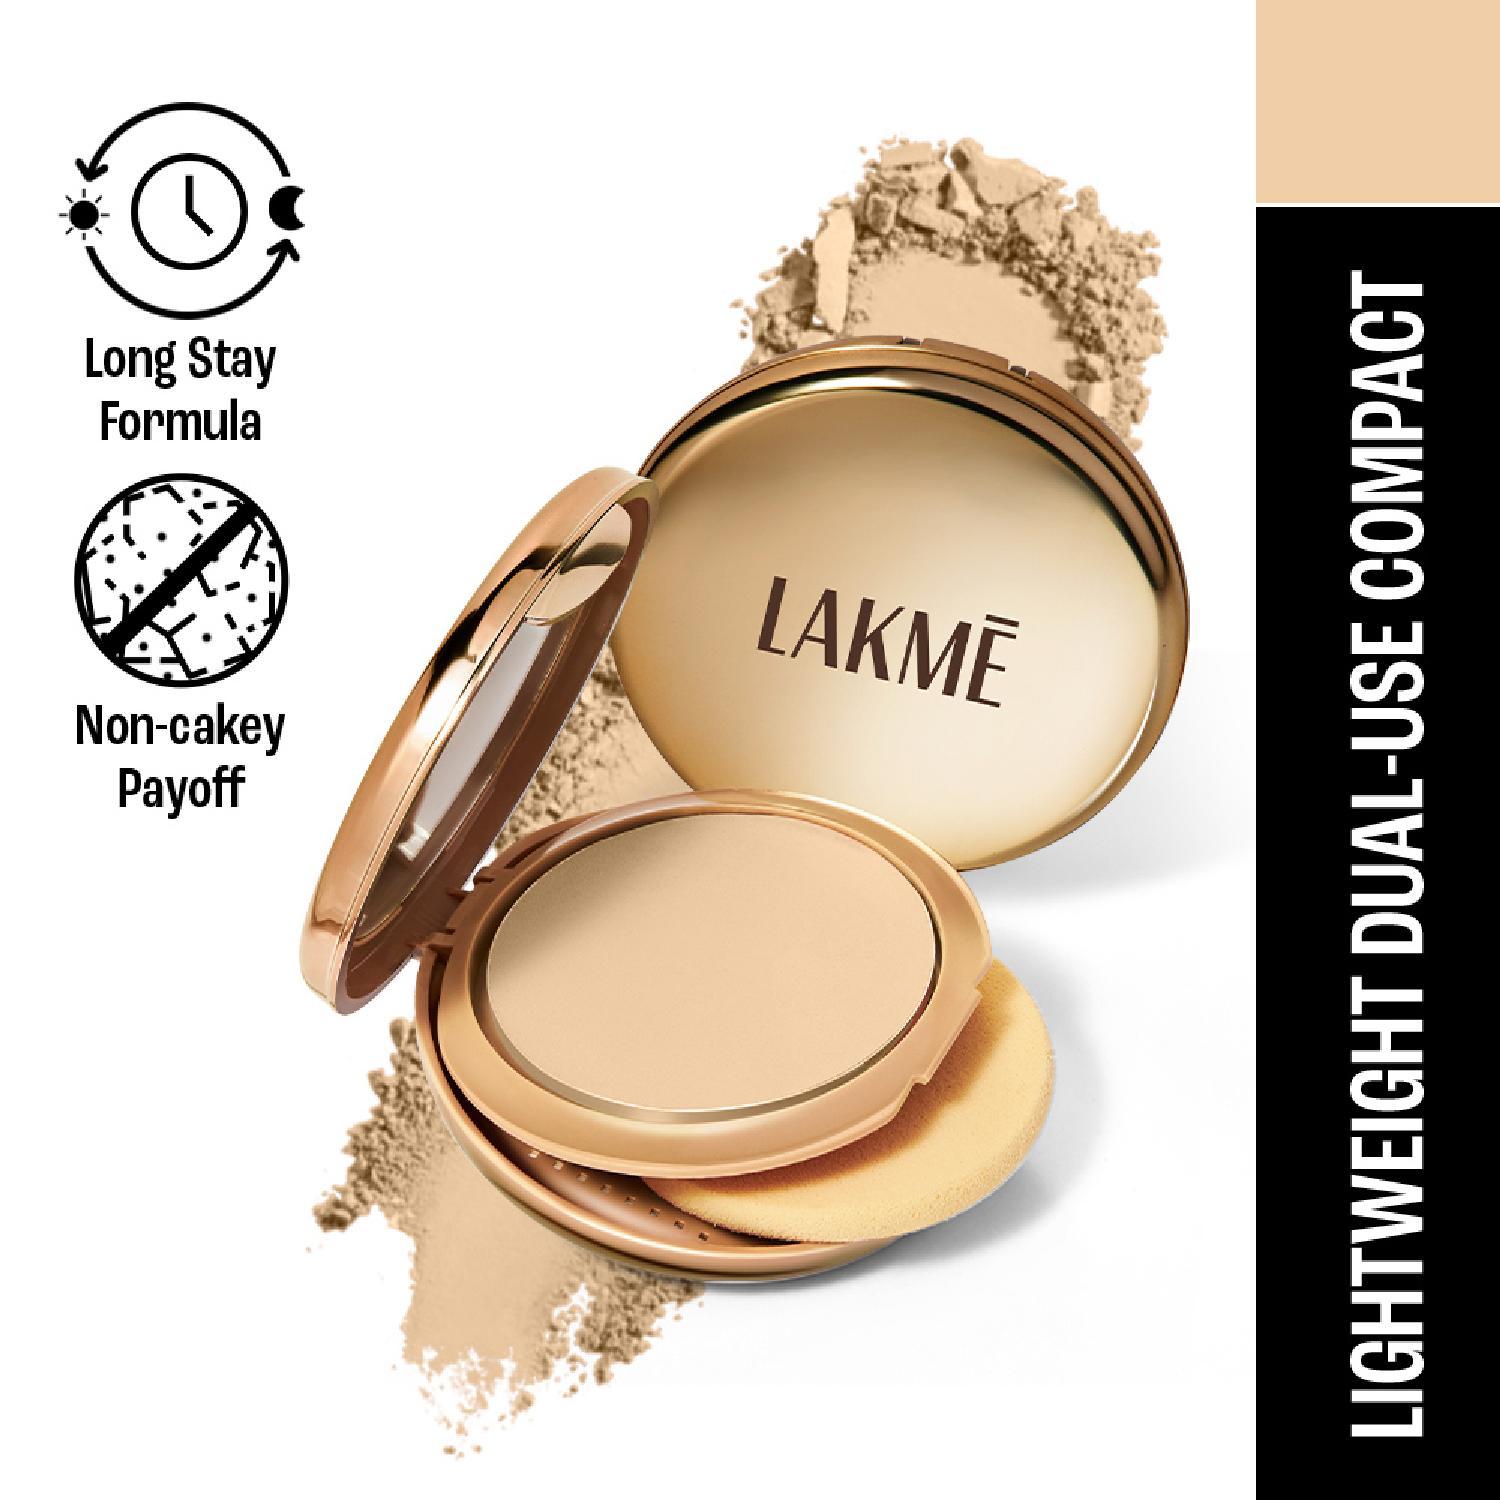 Lakme | Lakme 9 to 5 Unreal Dual Cover Pressed Powder, 2 In 1 Compact + Foundation, 10 Ivory (9g)